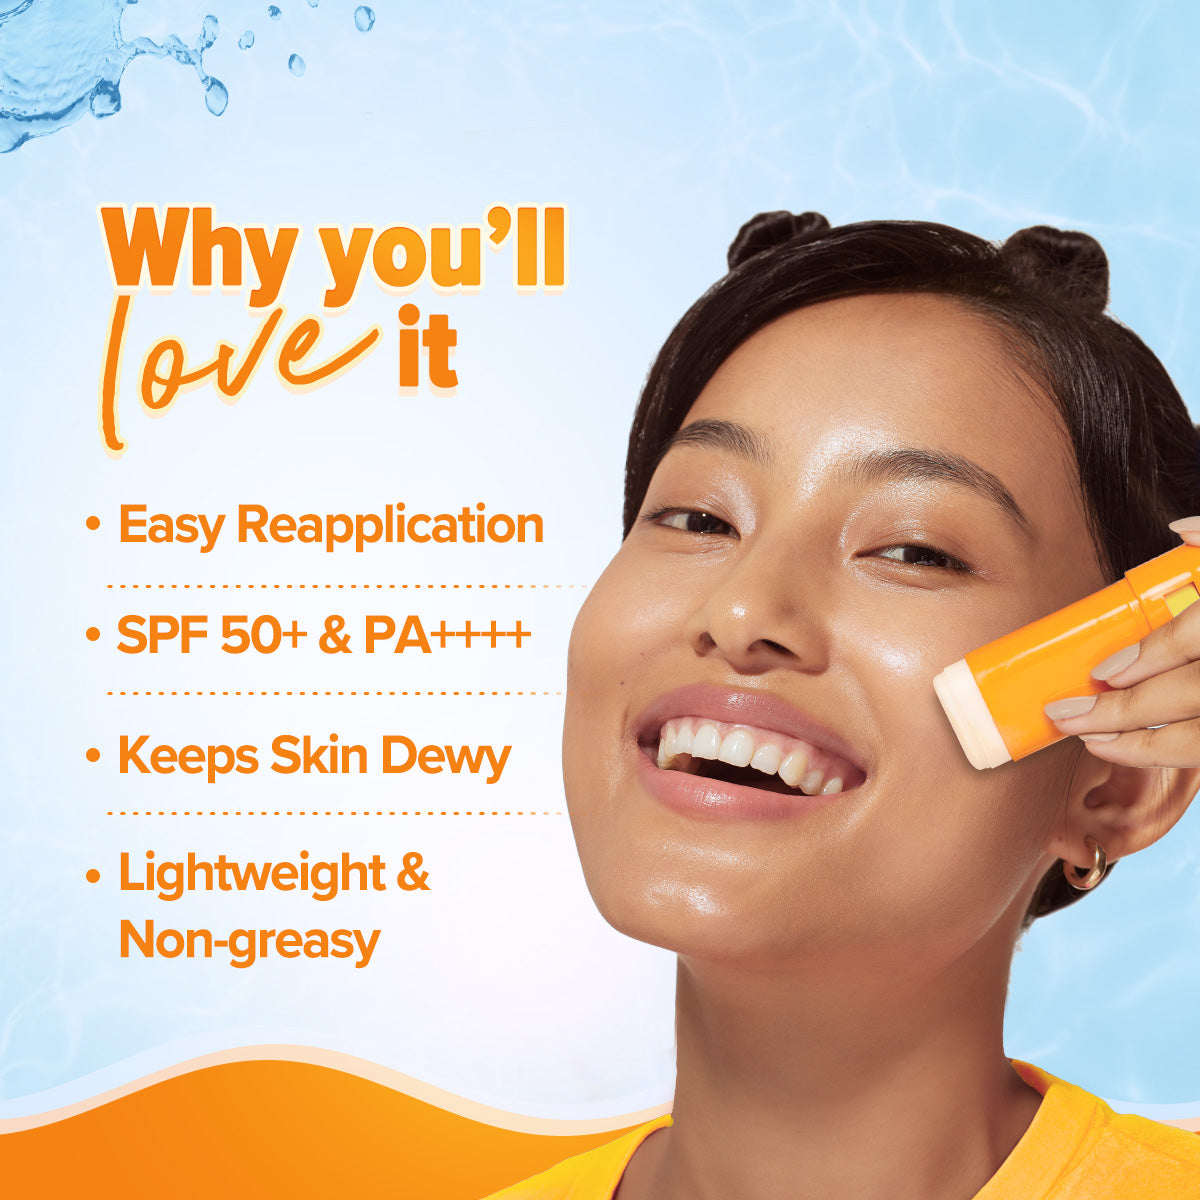 Glow+ Dewy Sunstick with SPF 50+ & PA++++ for Easy Reapplication  & No White Cast - 20g